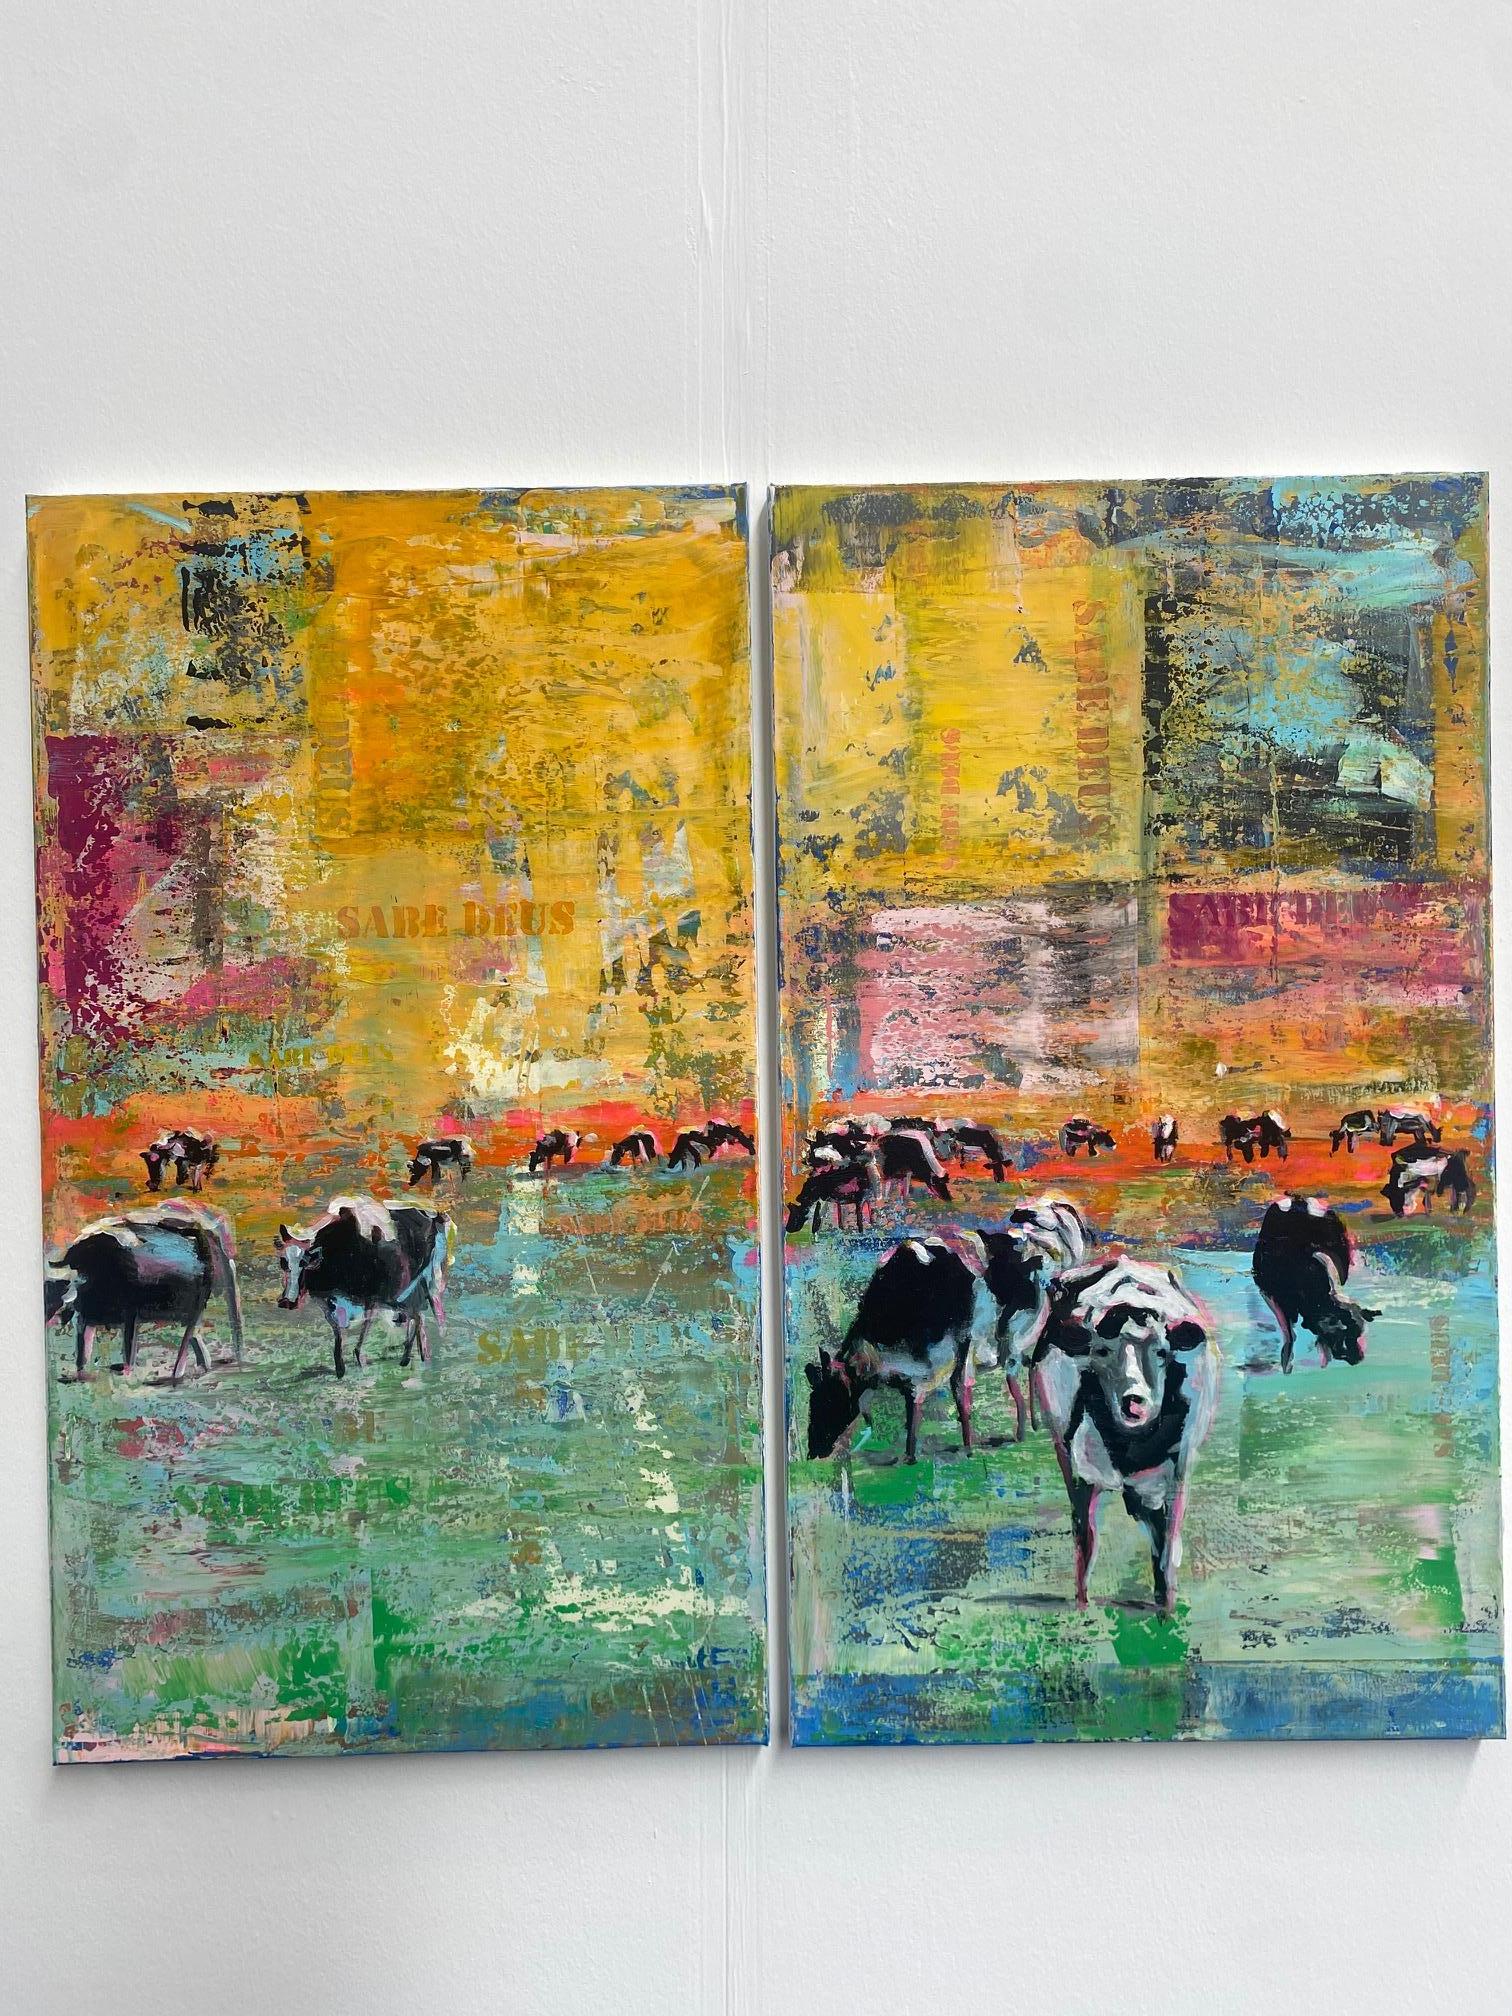 Cows Nr. 2 - Dyptich, contemporary art, cows figurative with street art elements - Contemporary Painting by Michael Pröpper